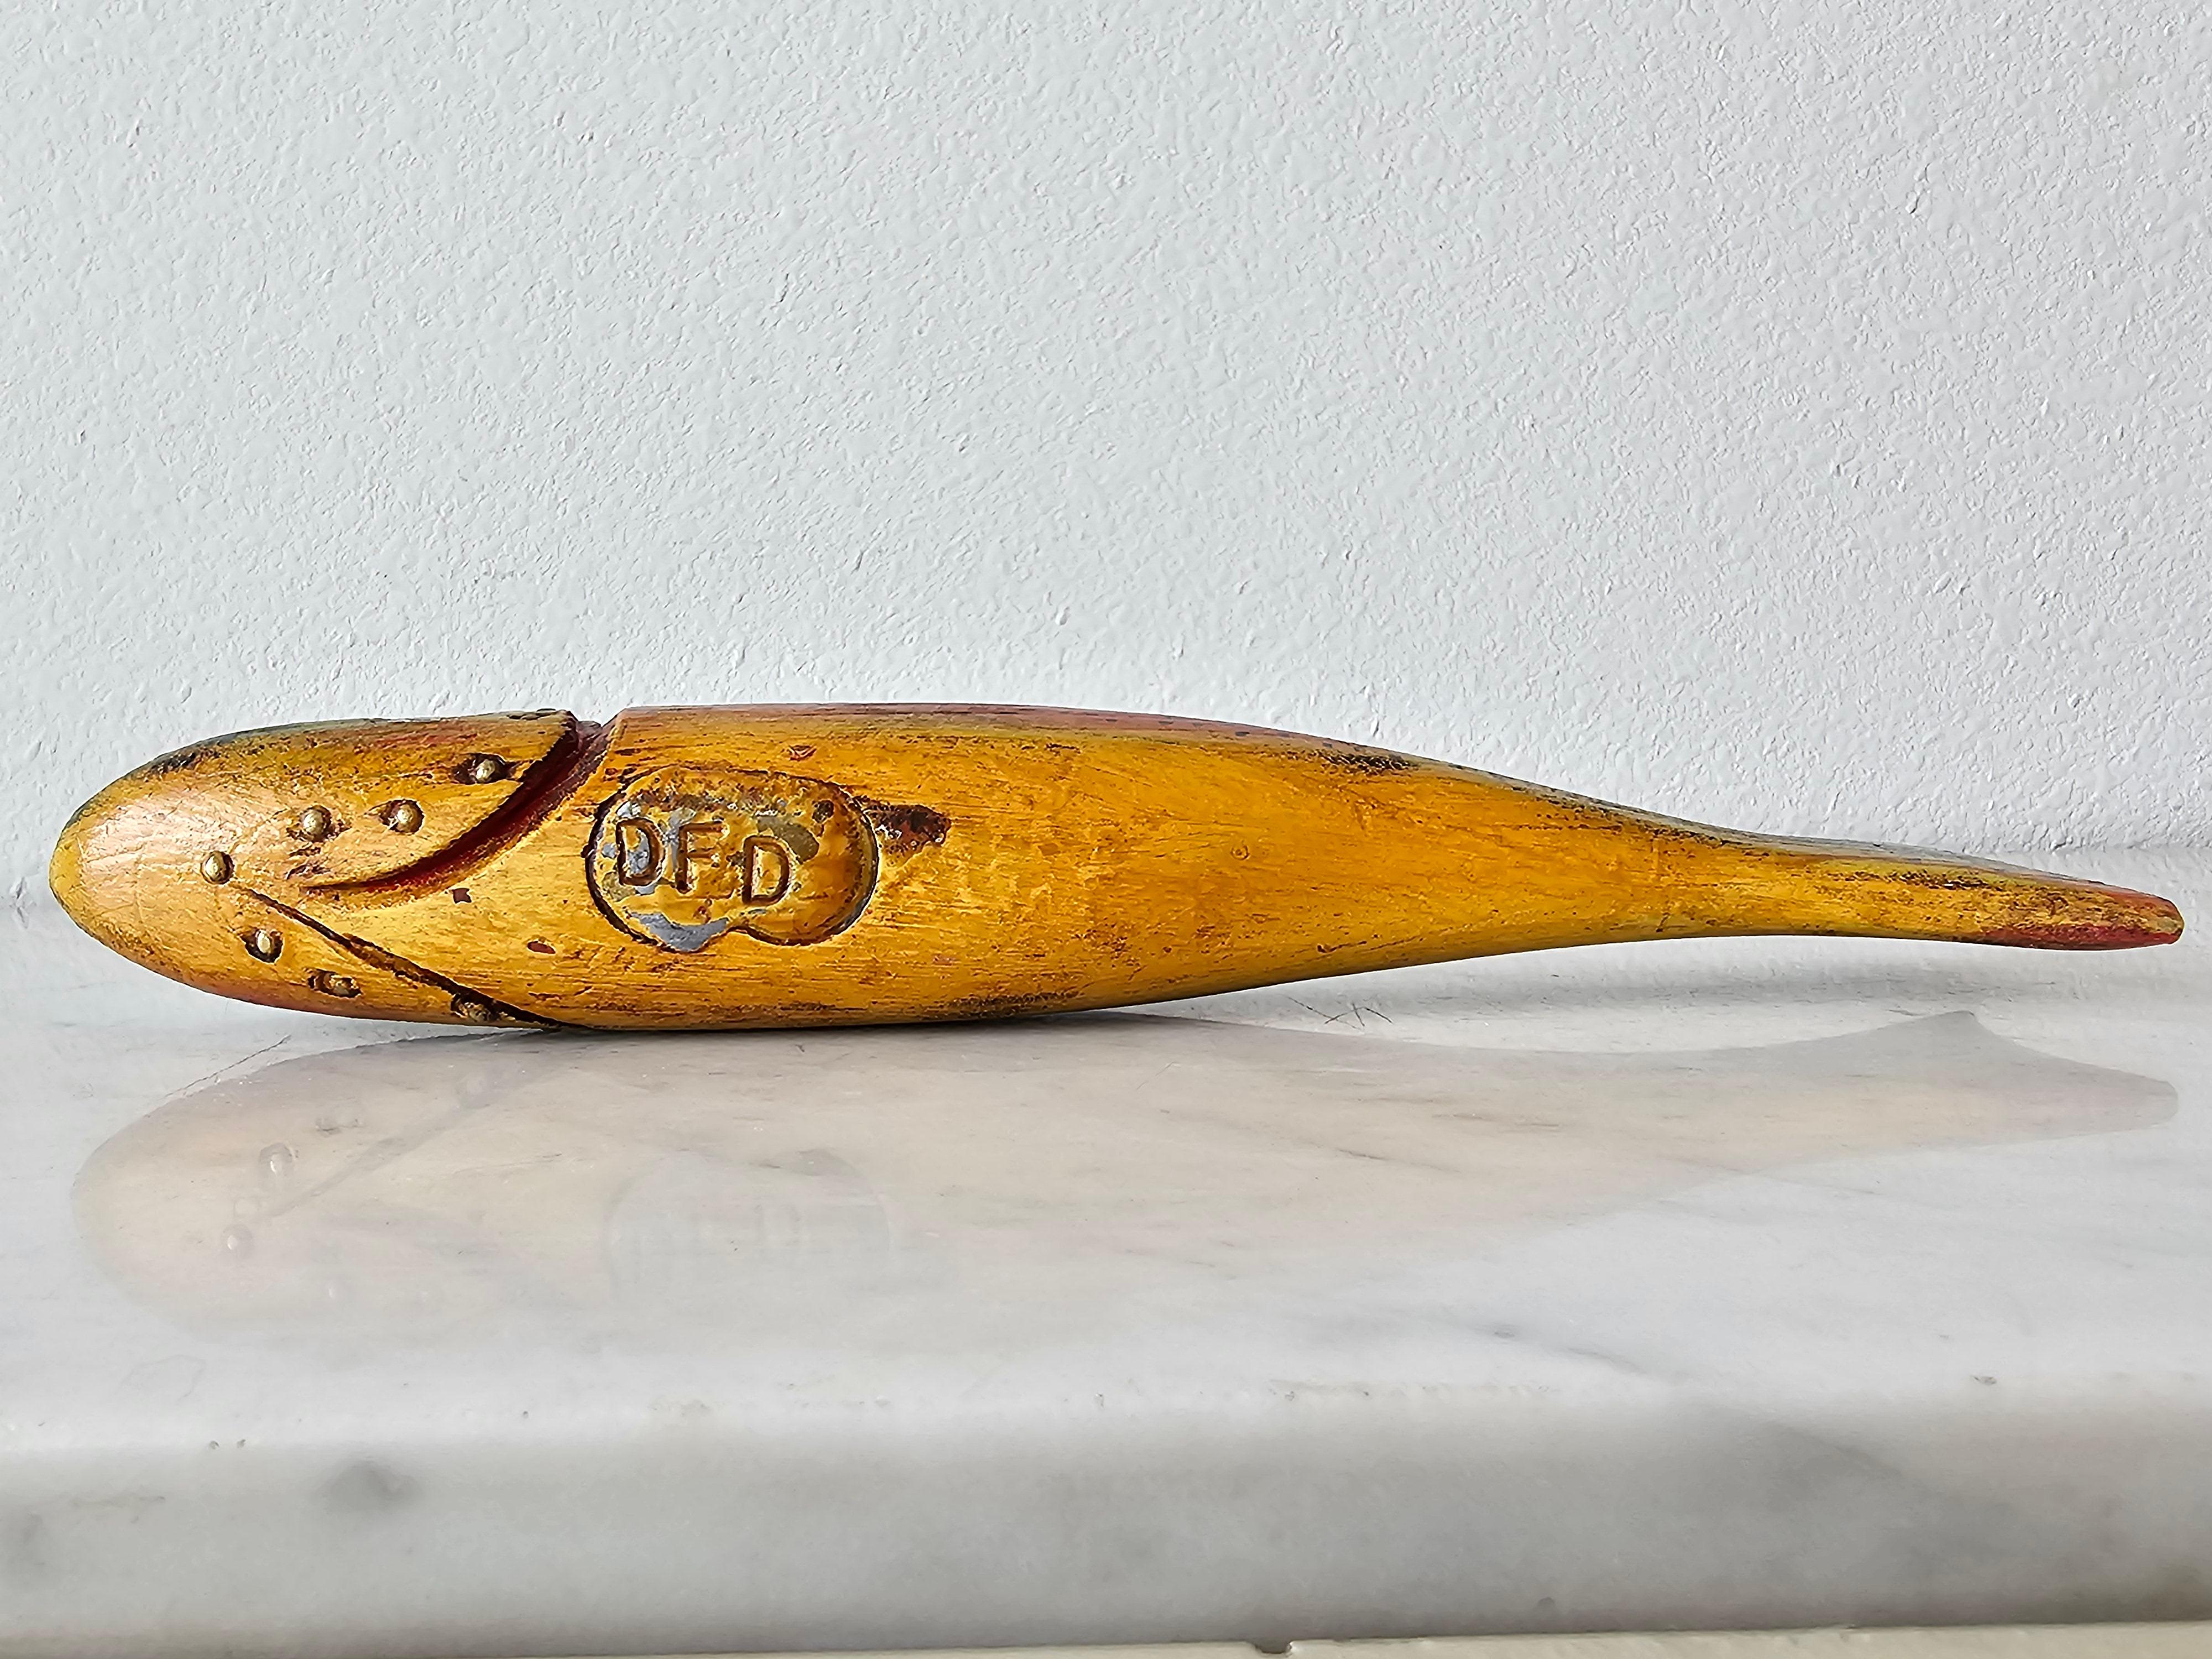 Vintage American Folk Art Duluth Fish Decoy Dfd Signed Carved Painted Trout 8